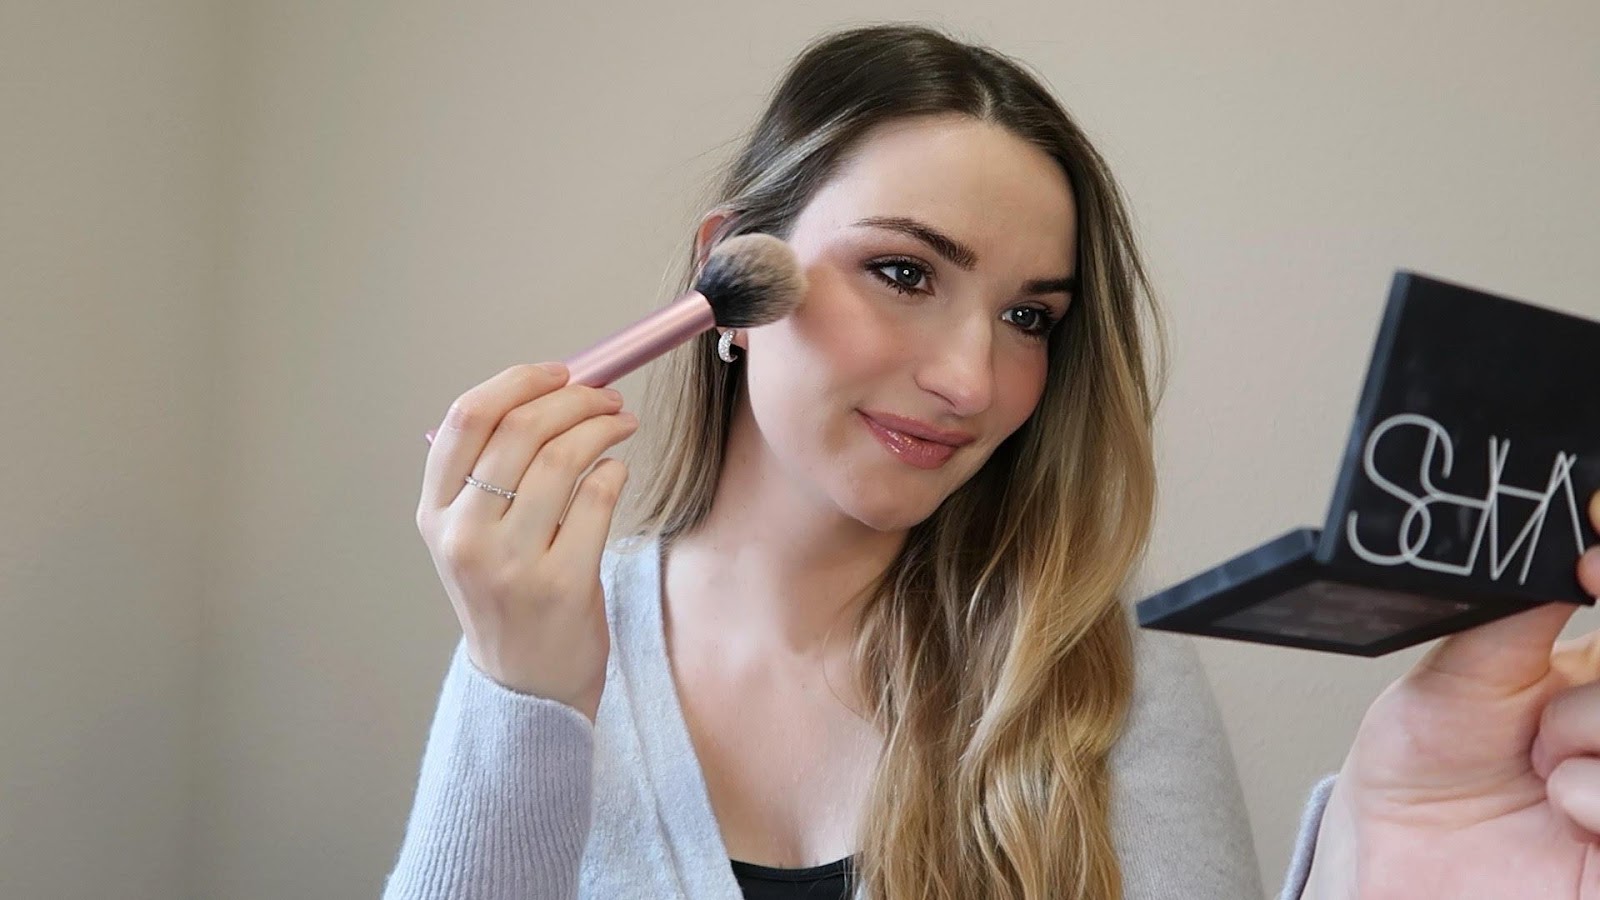 A person applying makeup with a brush

Description automatically generated